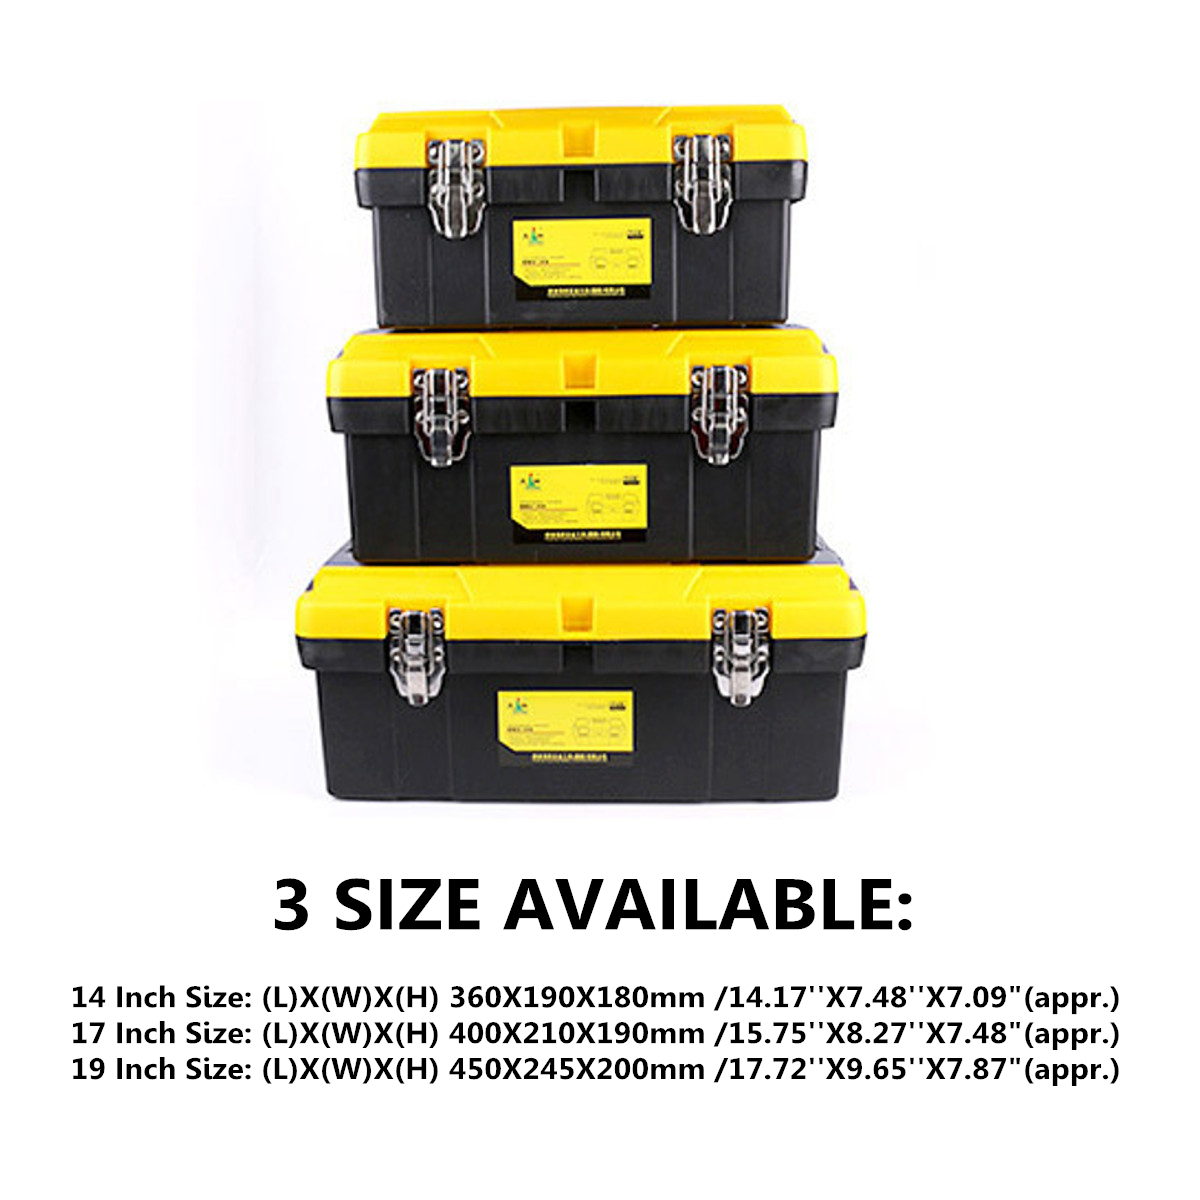 141719-Inch-Plastic-Work-Tools-Storage-Box-Protable-Carrying-Case-Handle-Accessories-Holder-1321332-6